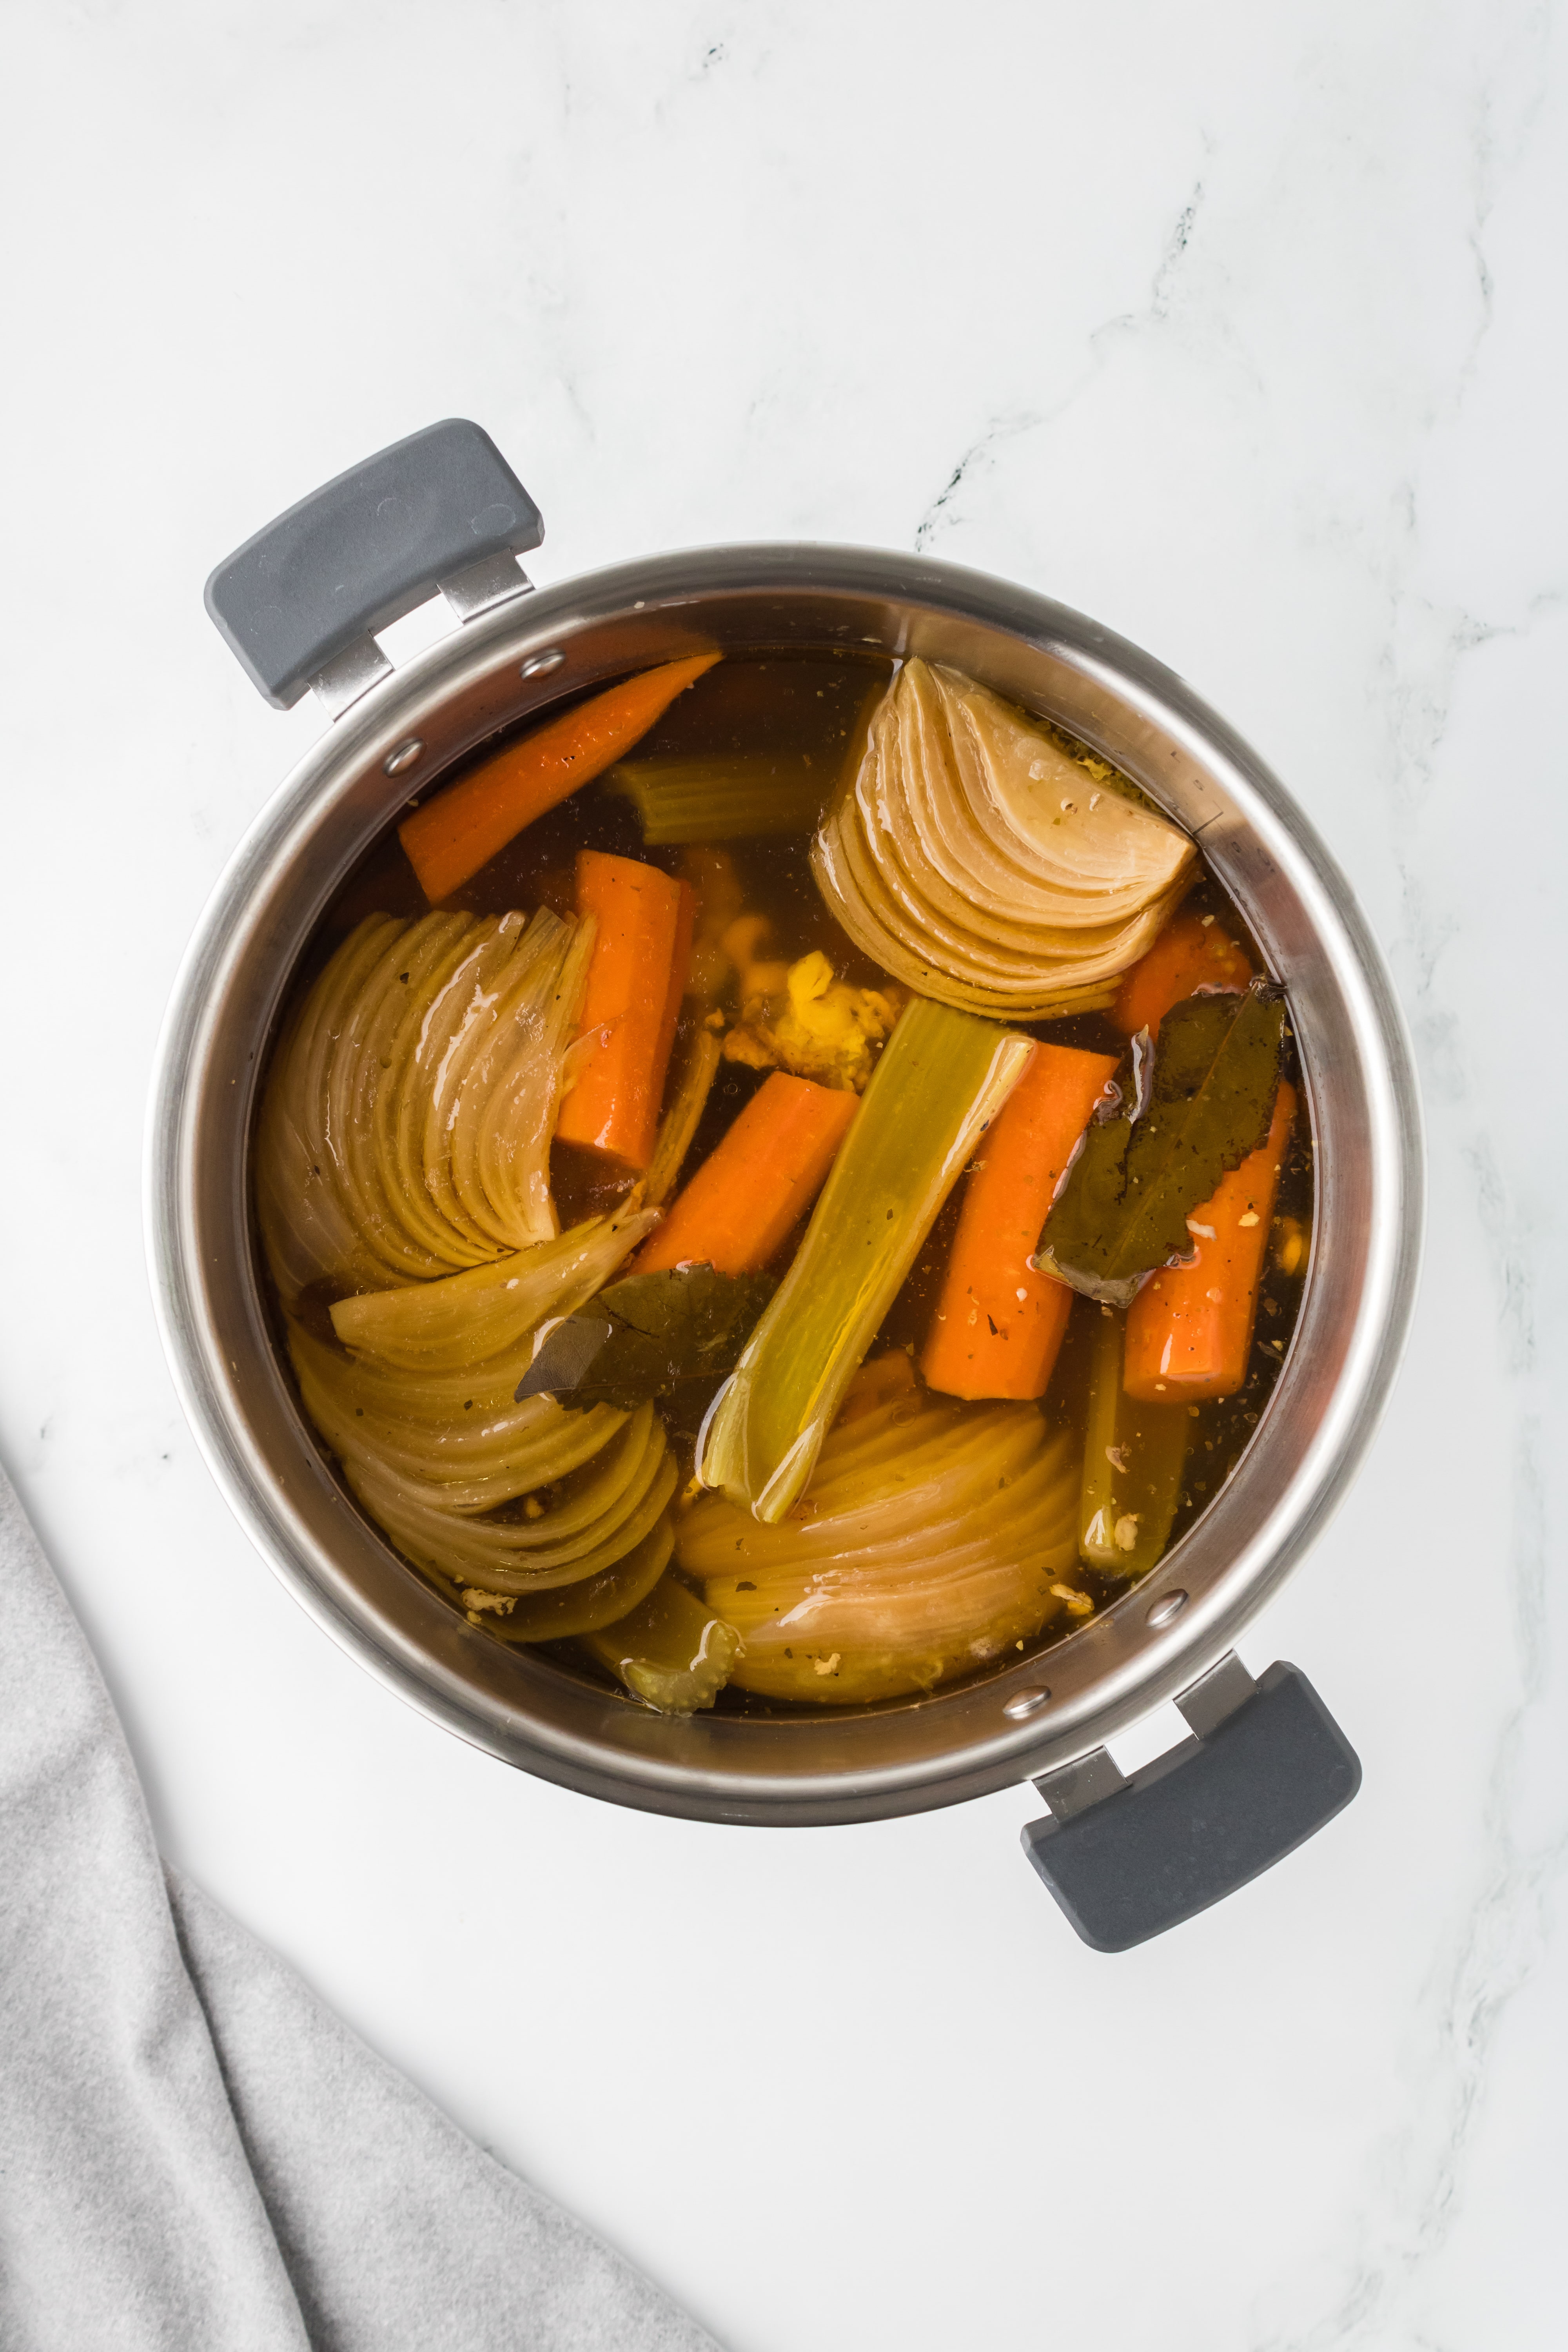 An Instant Pot filled with broth with floating cooked vegetables in it.